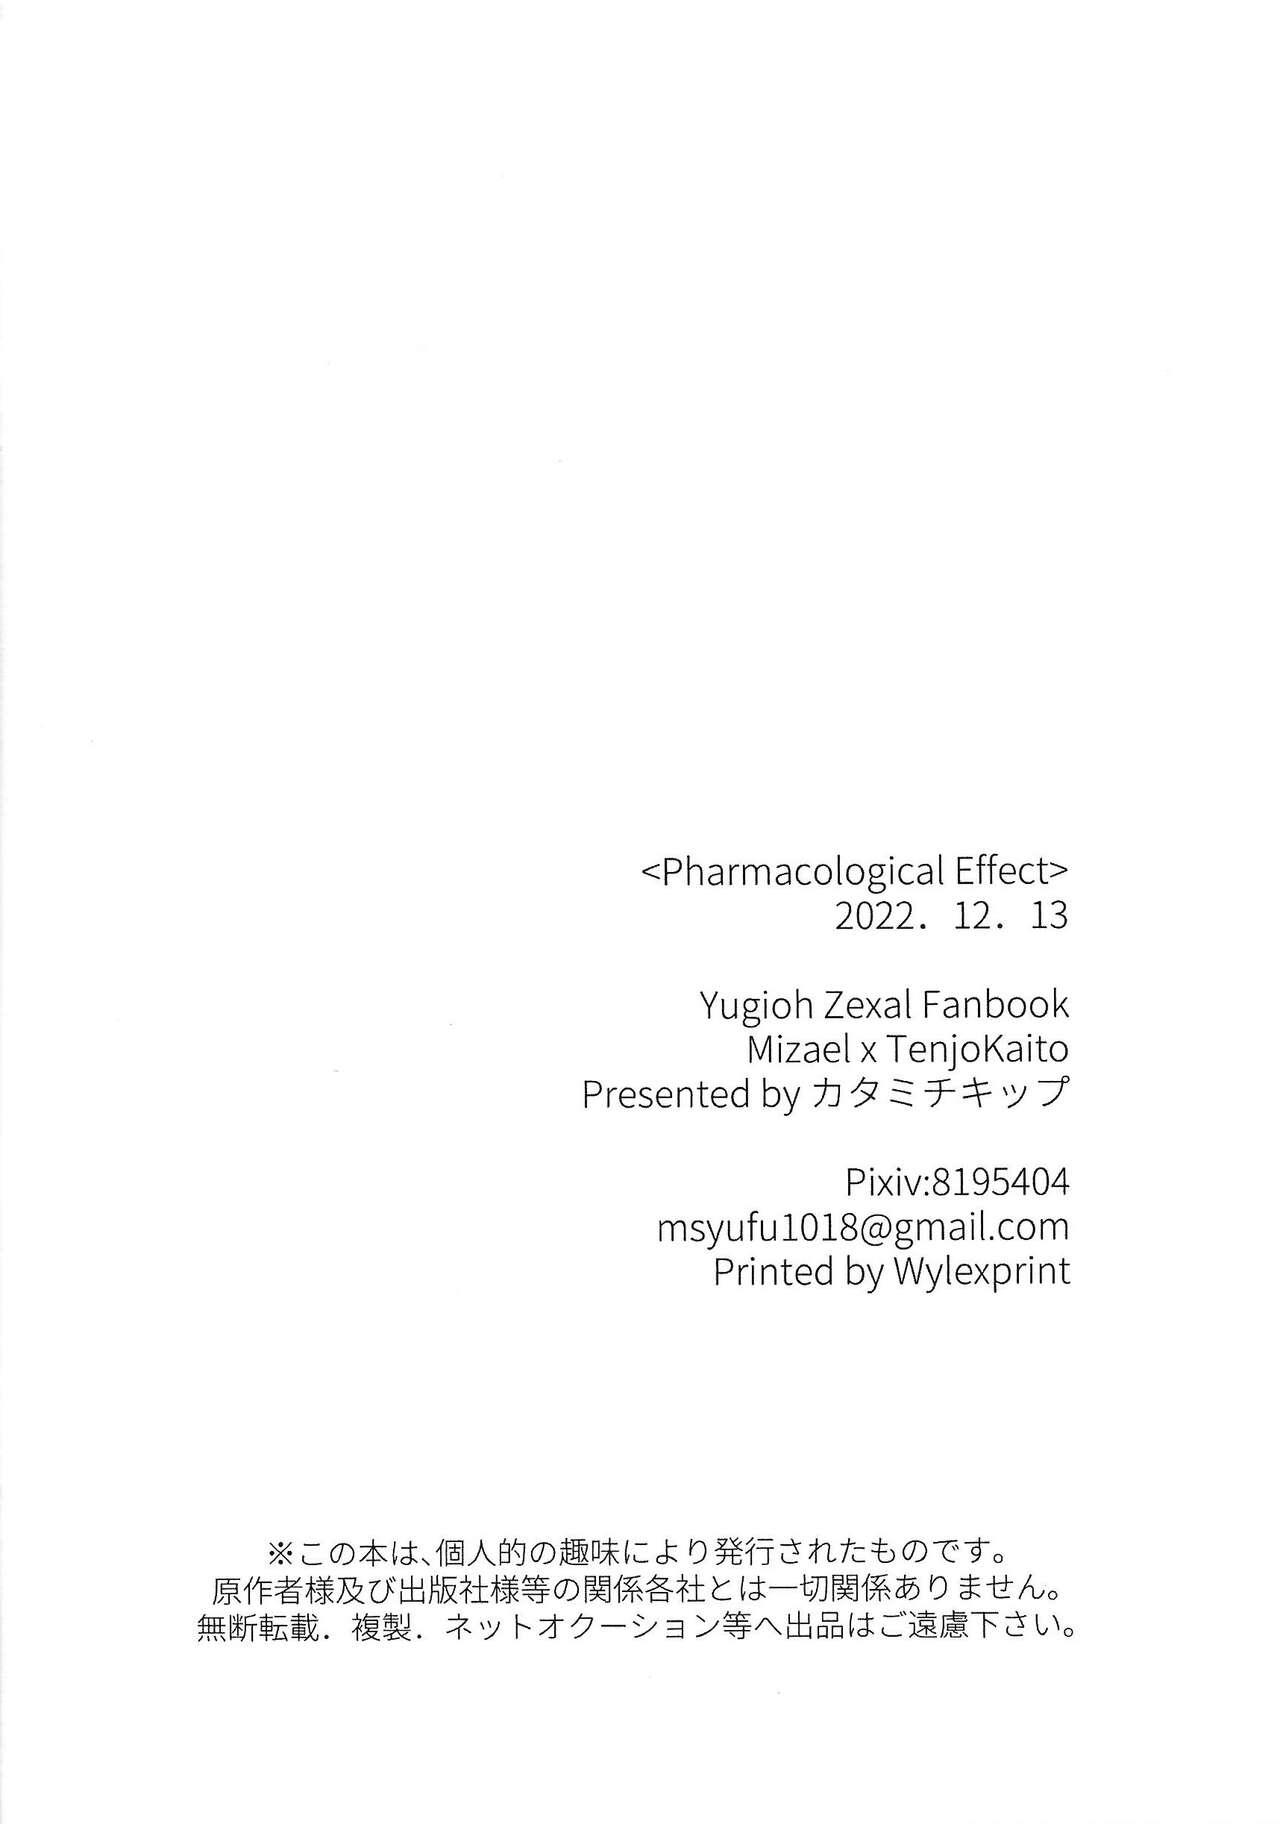 Pharmacological Effect 24